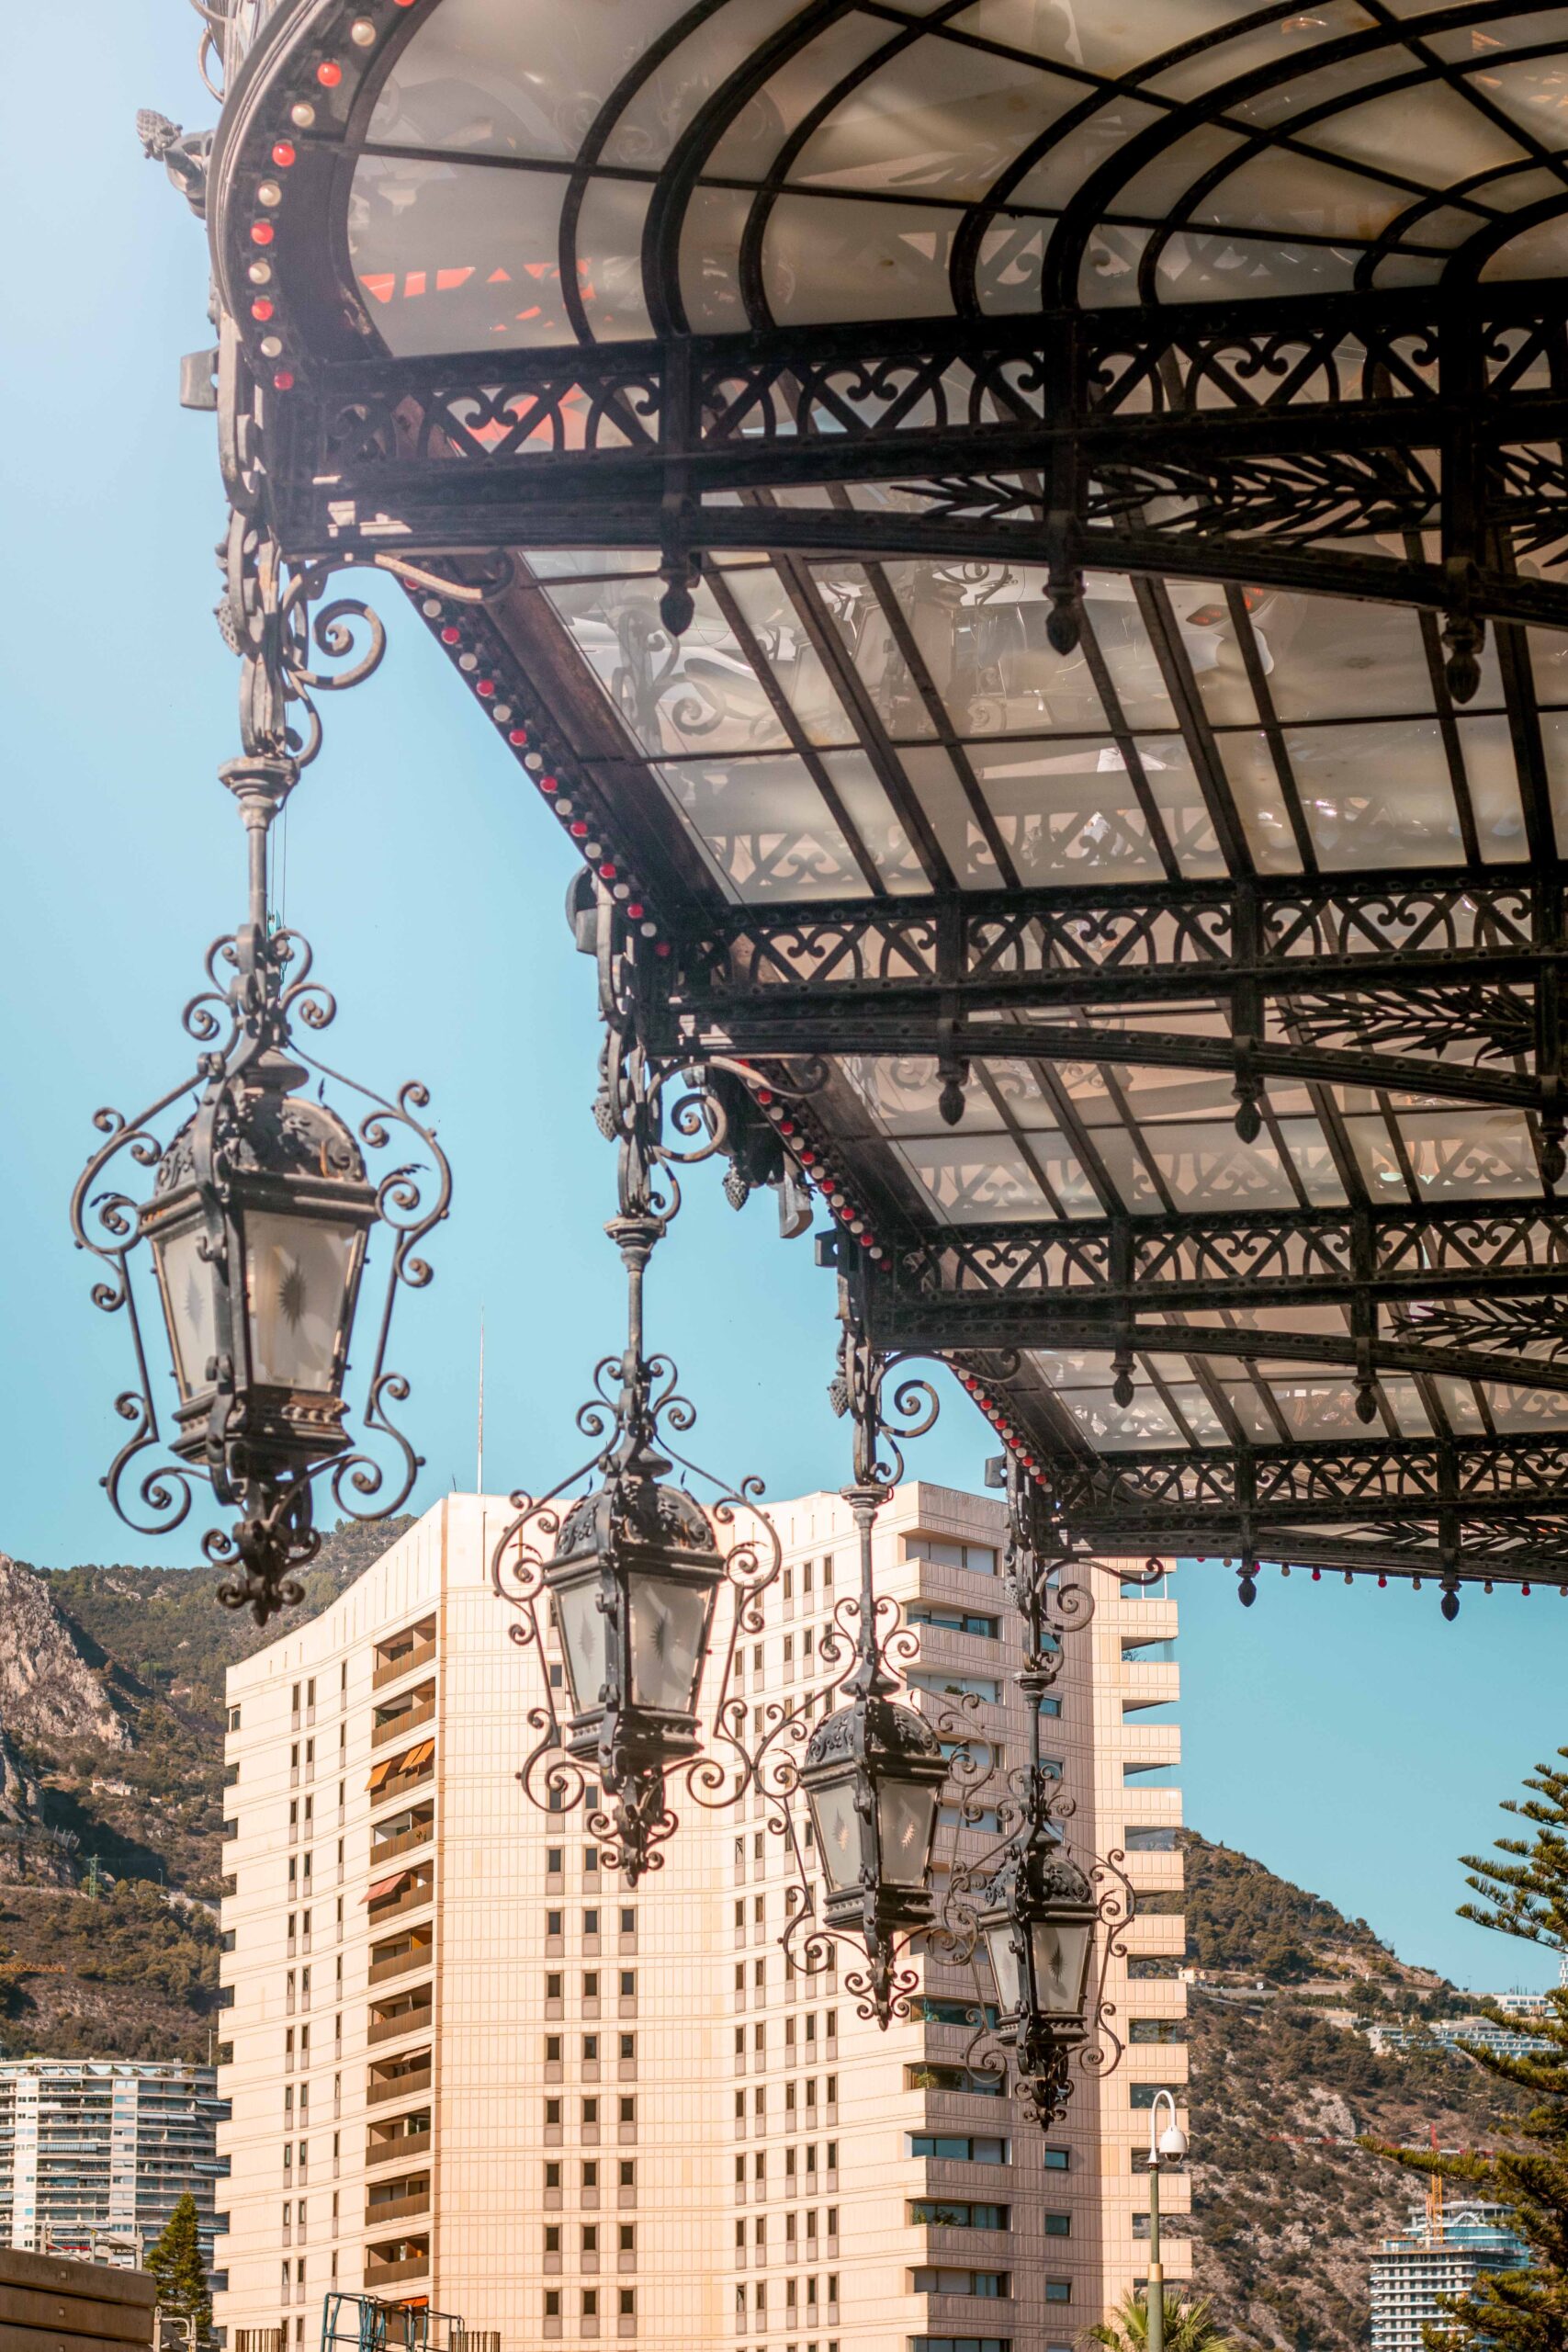 Details of the lamps hanging from the Monte-Carlo Casino during a sunny day in Monaco